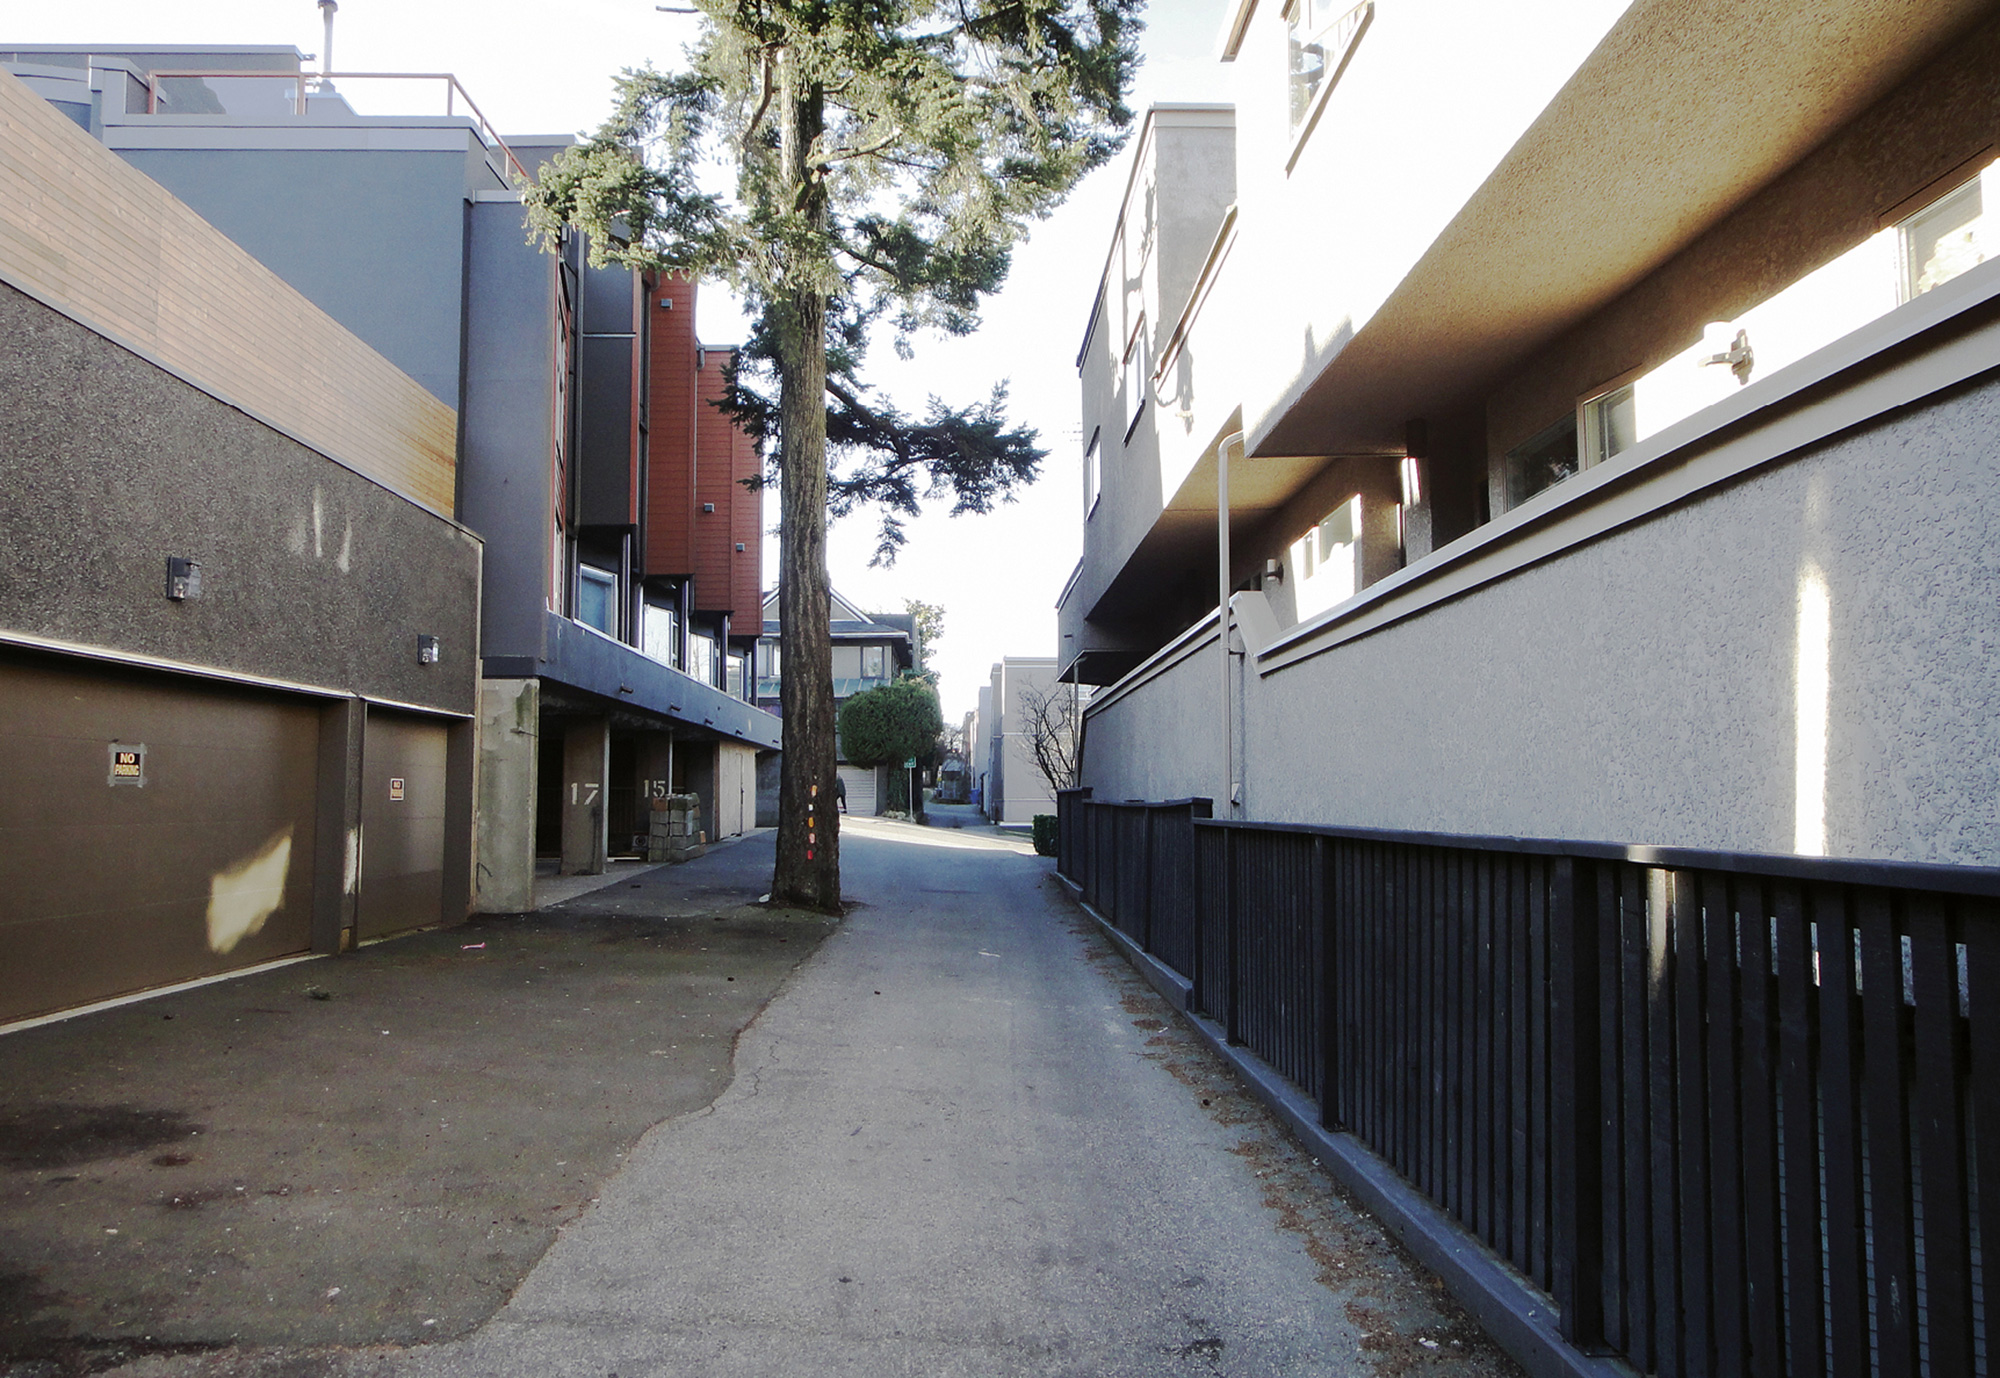 A photograph titled “Roundabout Vancouver: Laurel Lane at West Eighth Street, circa twenty ten.” It shows a quiet alleyway.